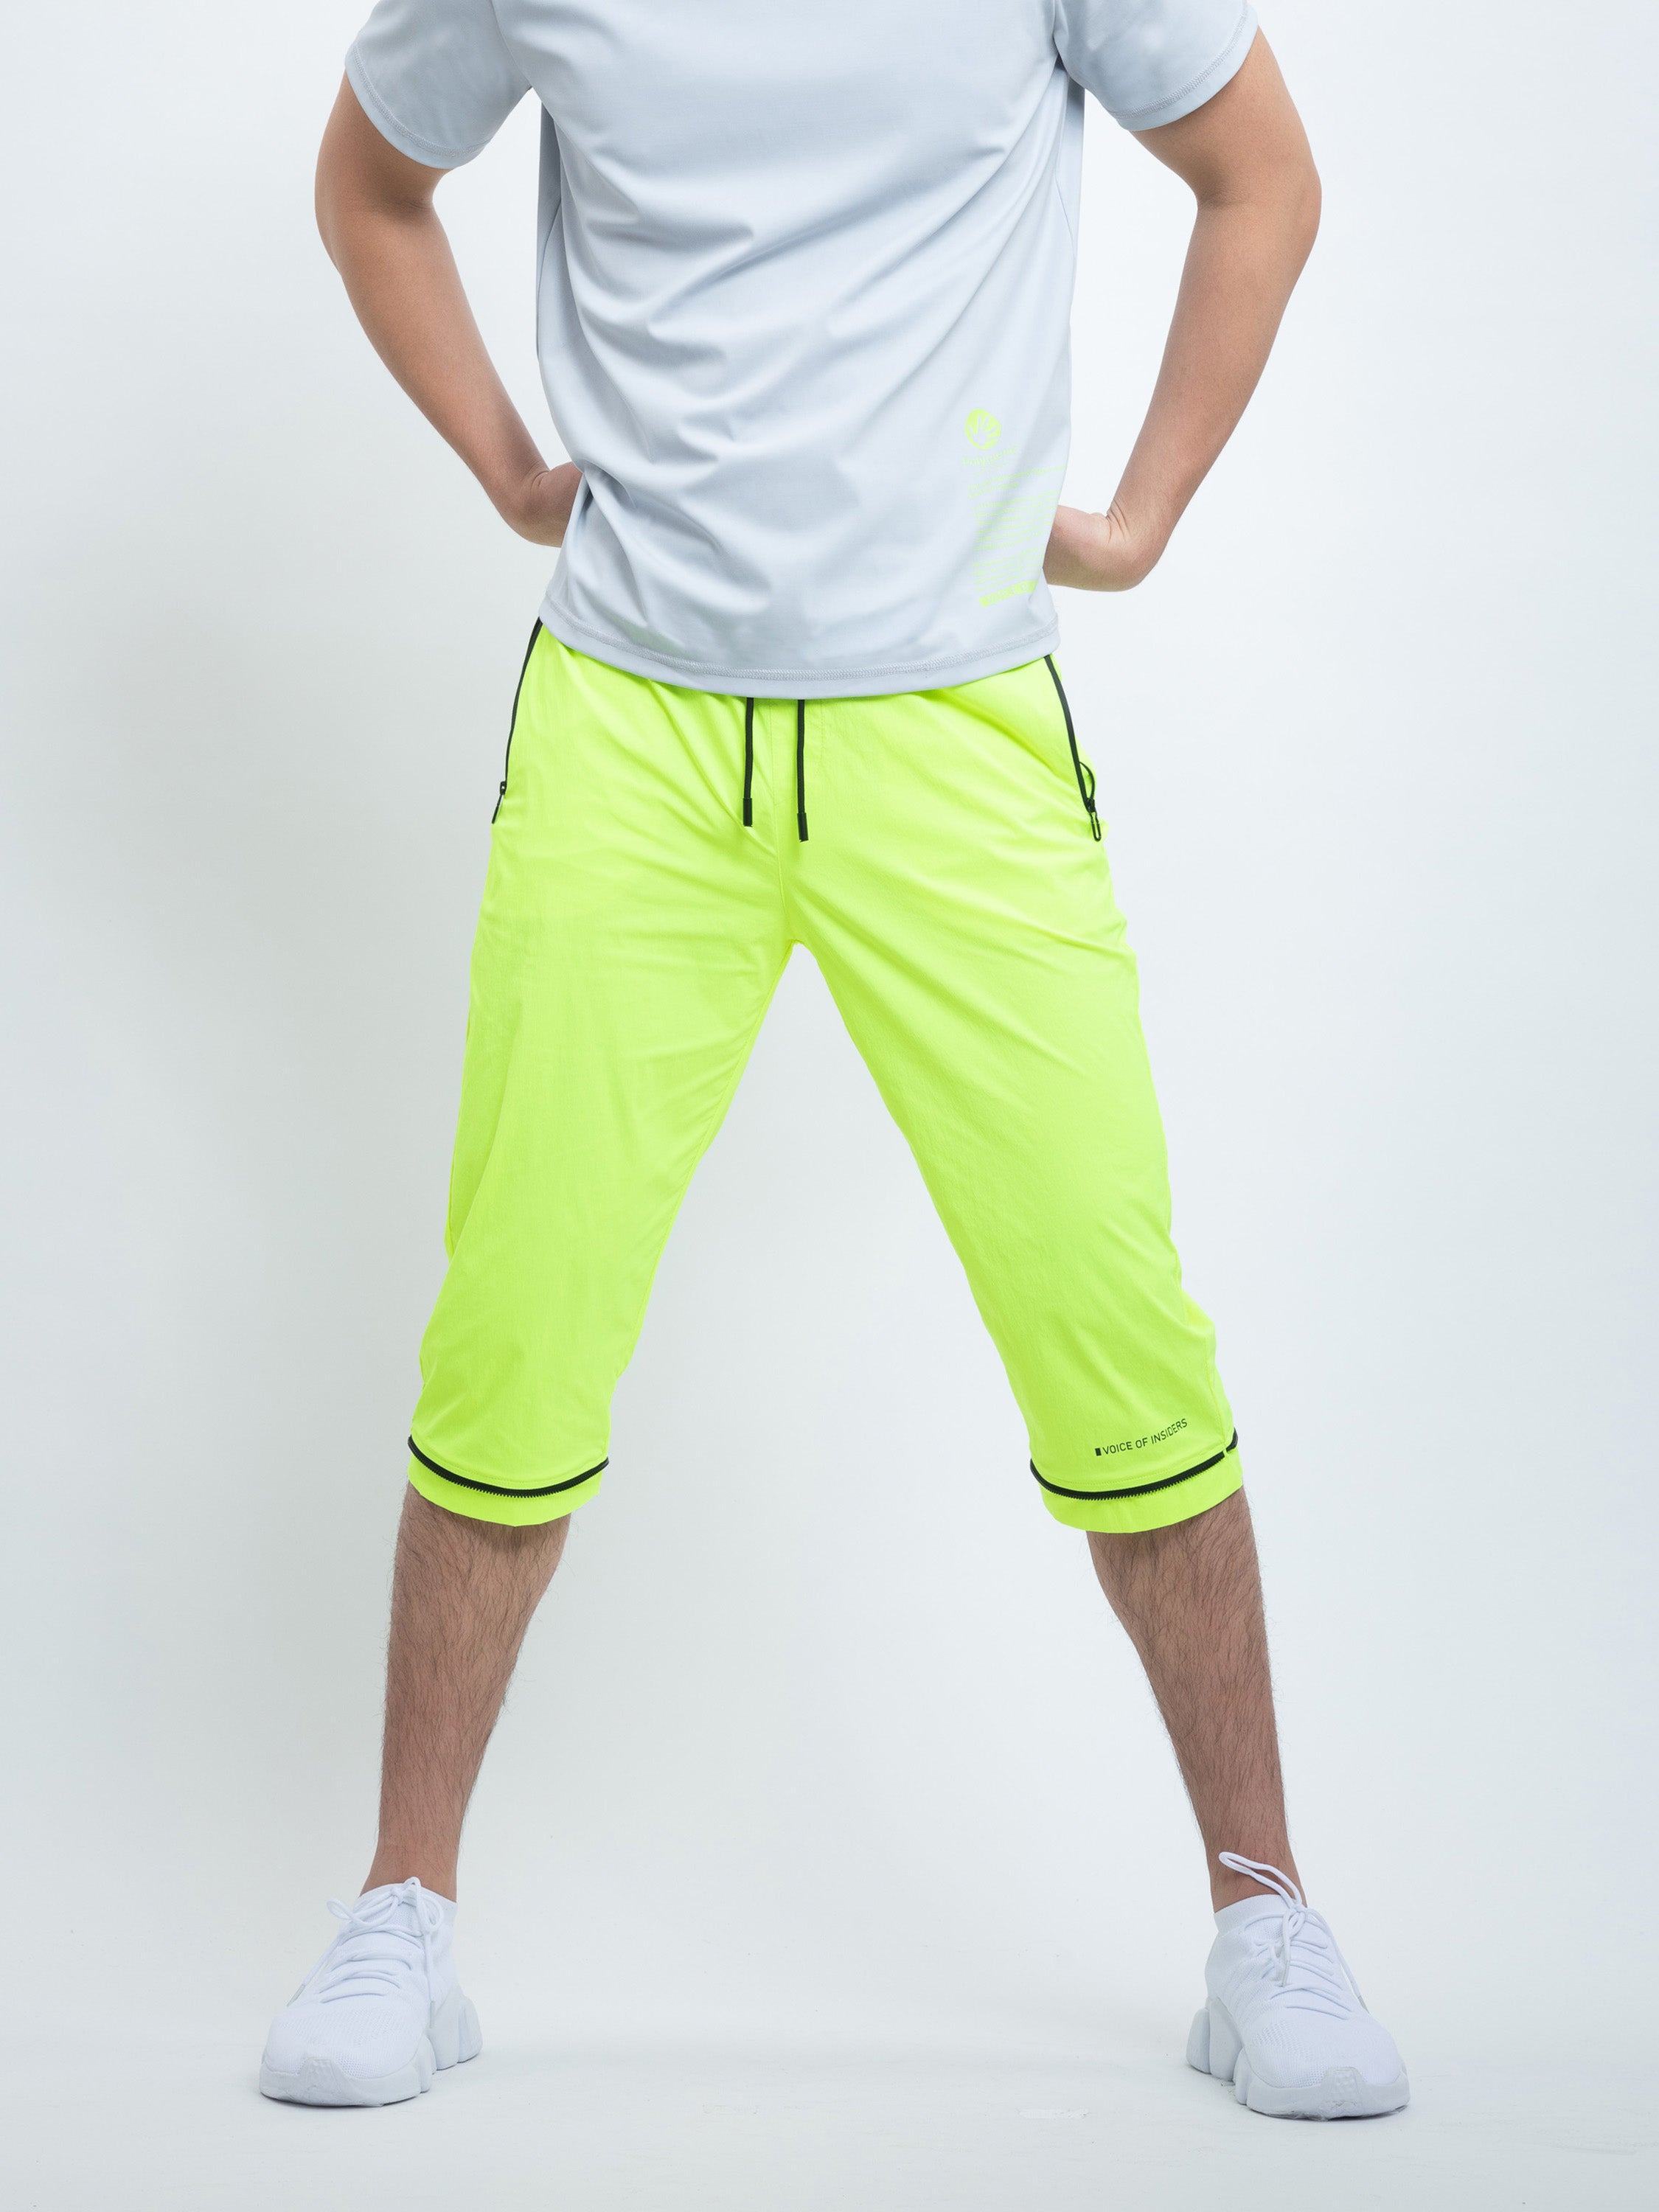 Transformable Pants in Neon Lime